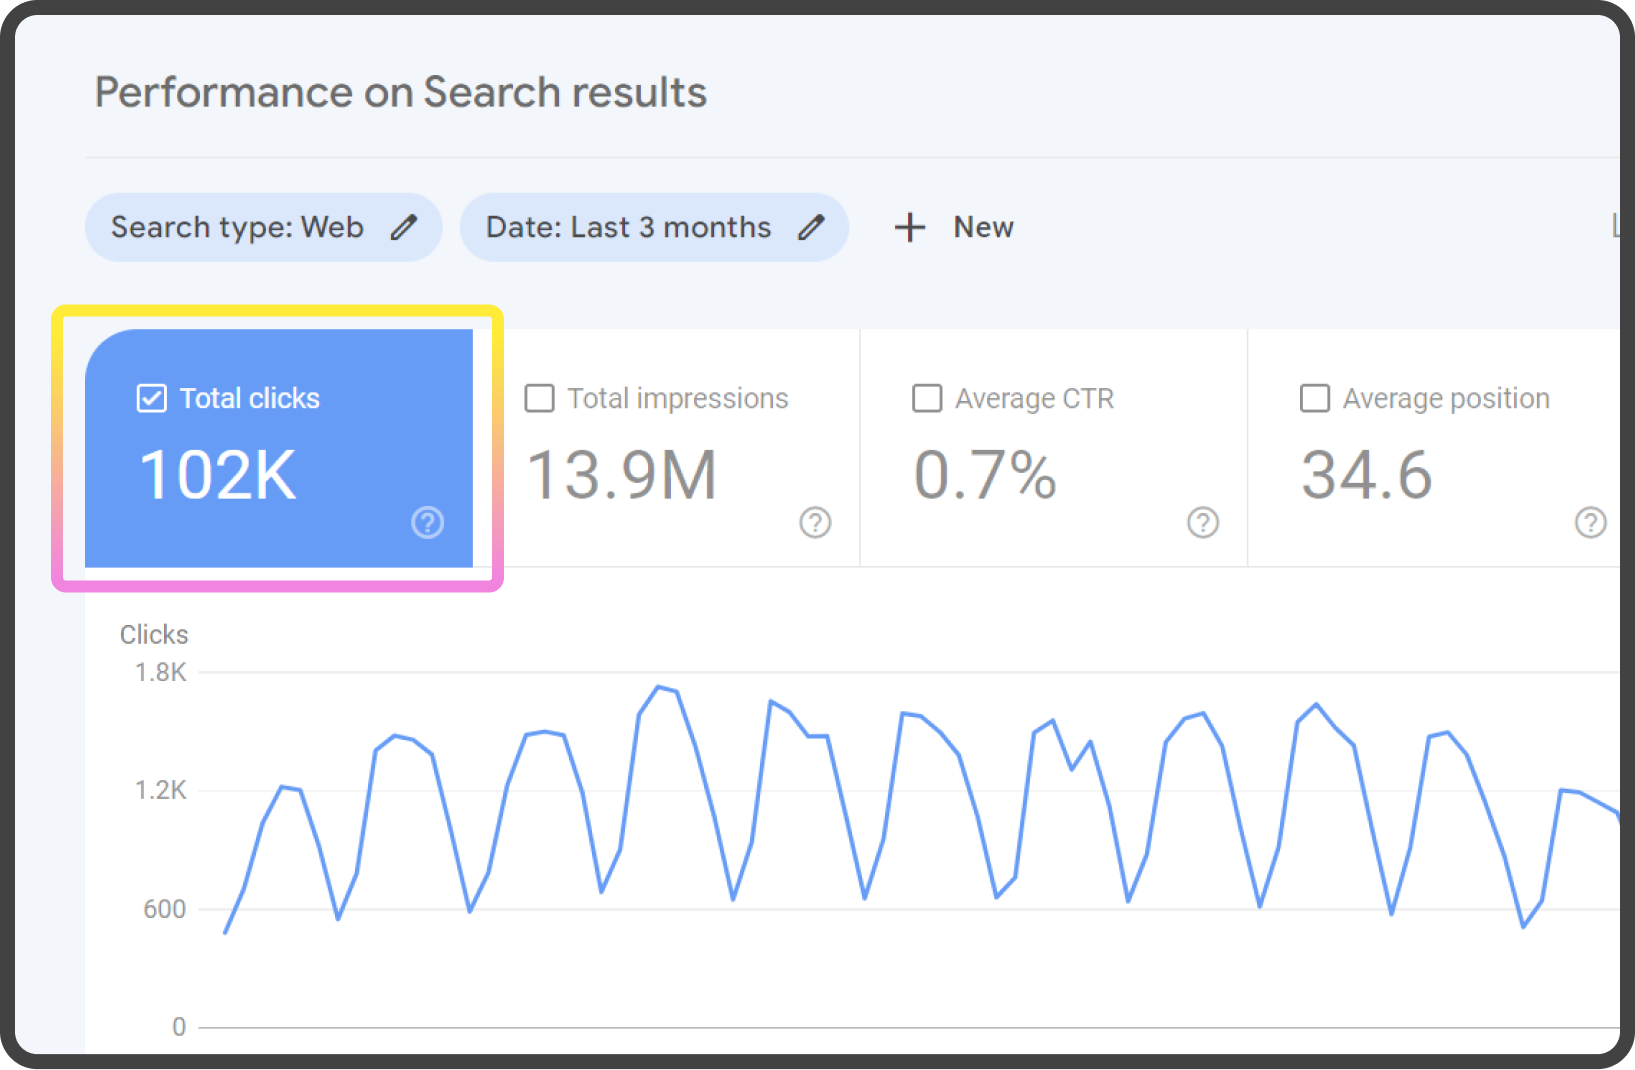 GSC performance on search results (clicks)